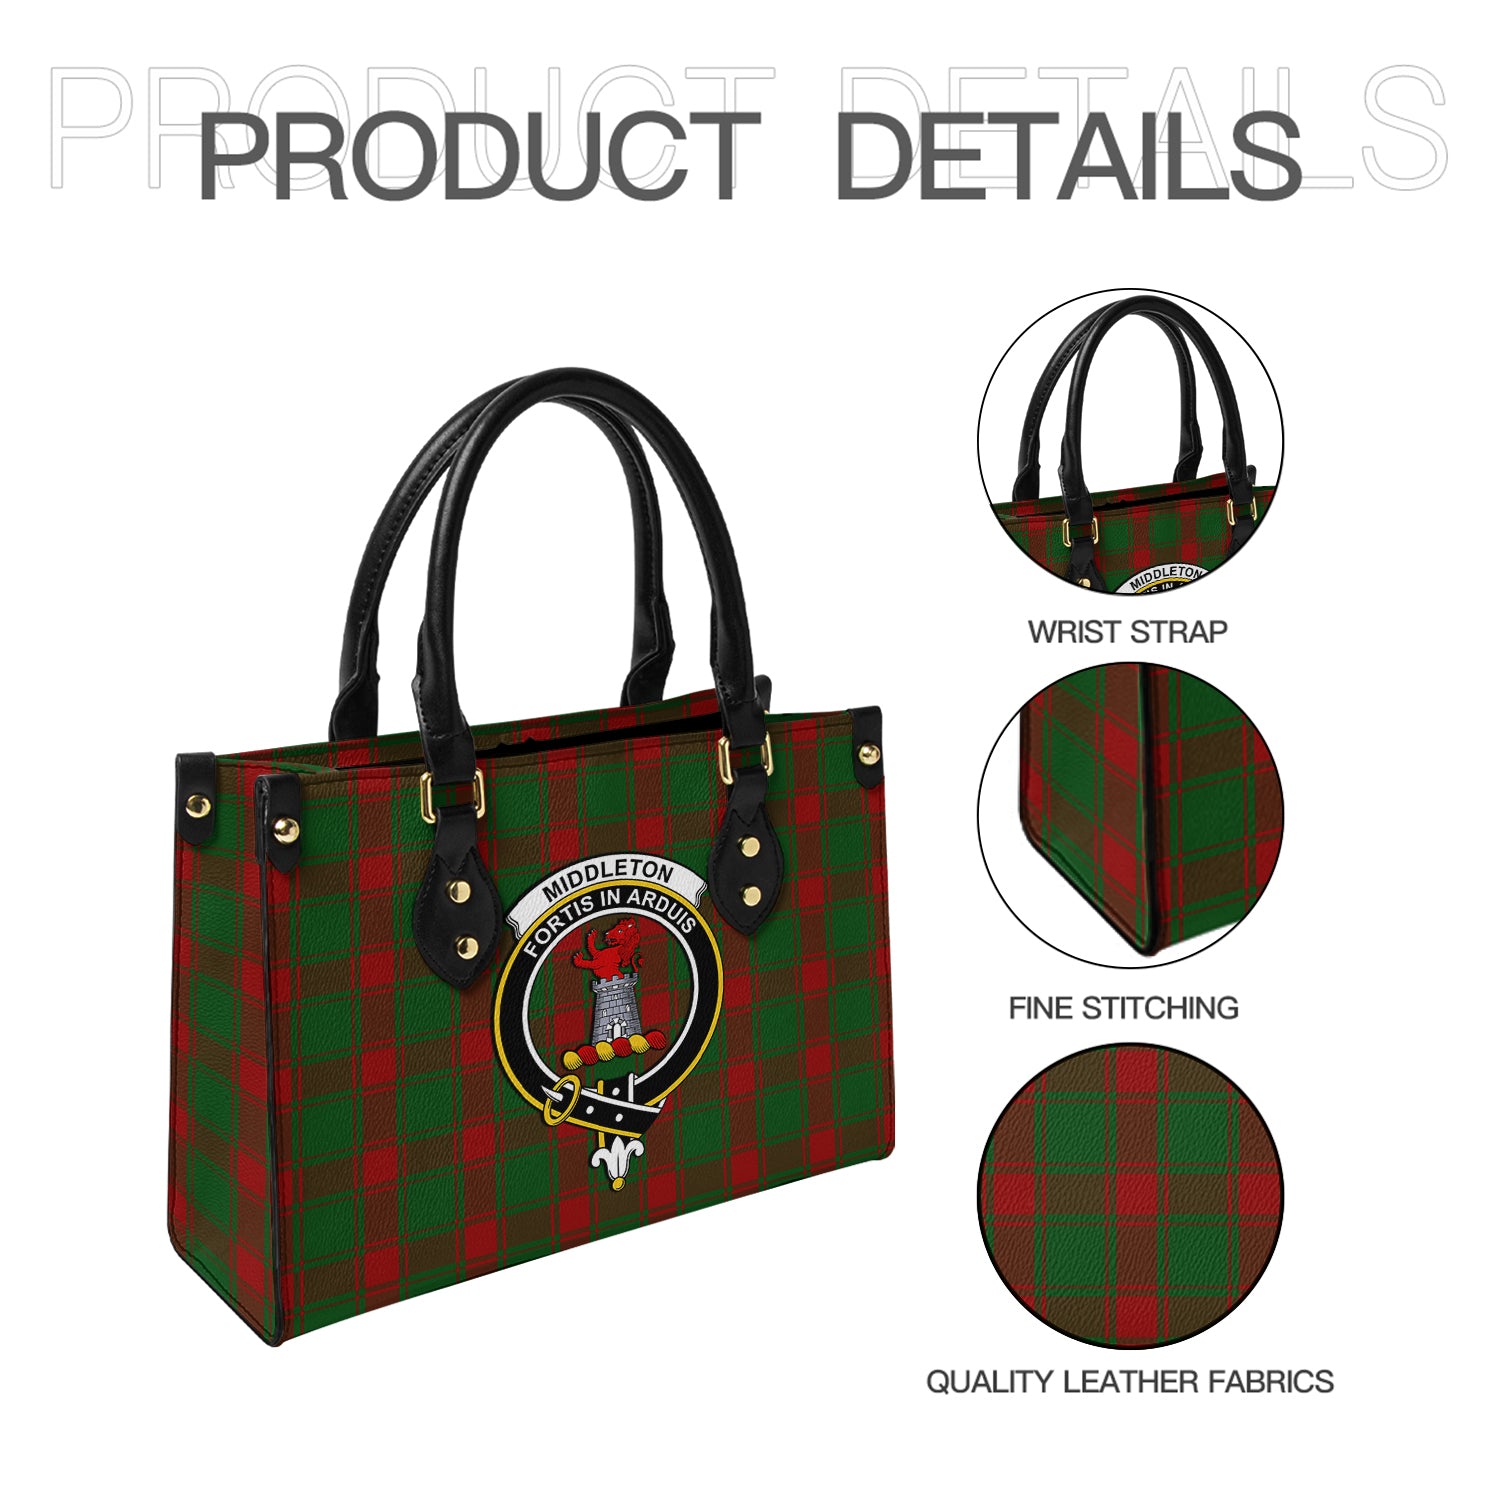 middleton-tartan-leather-bag-with-family-crest